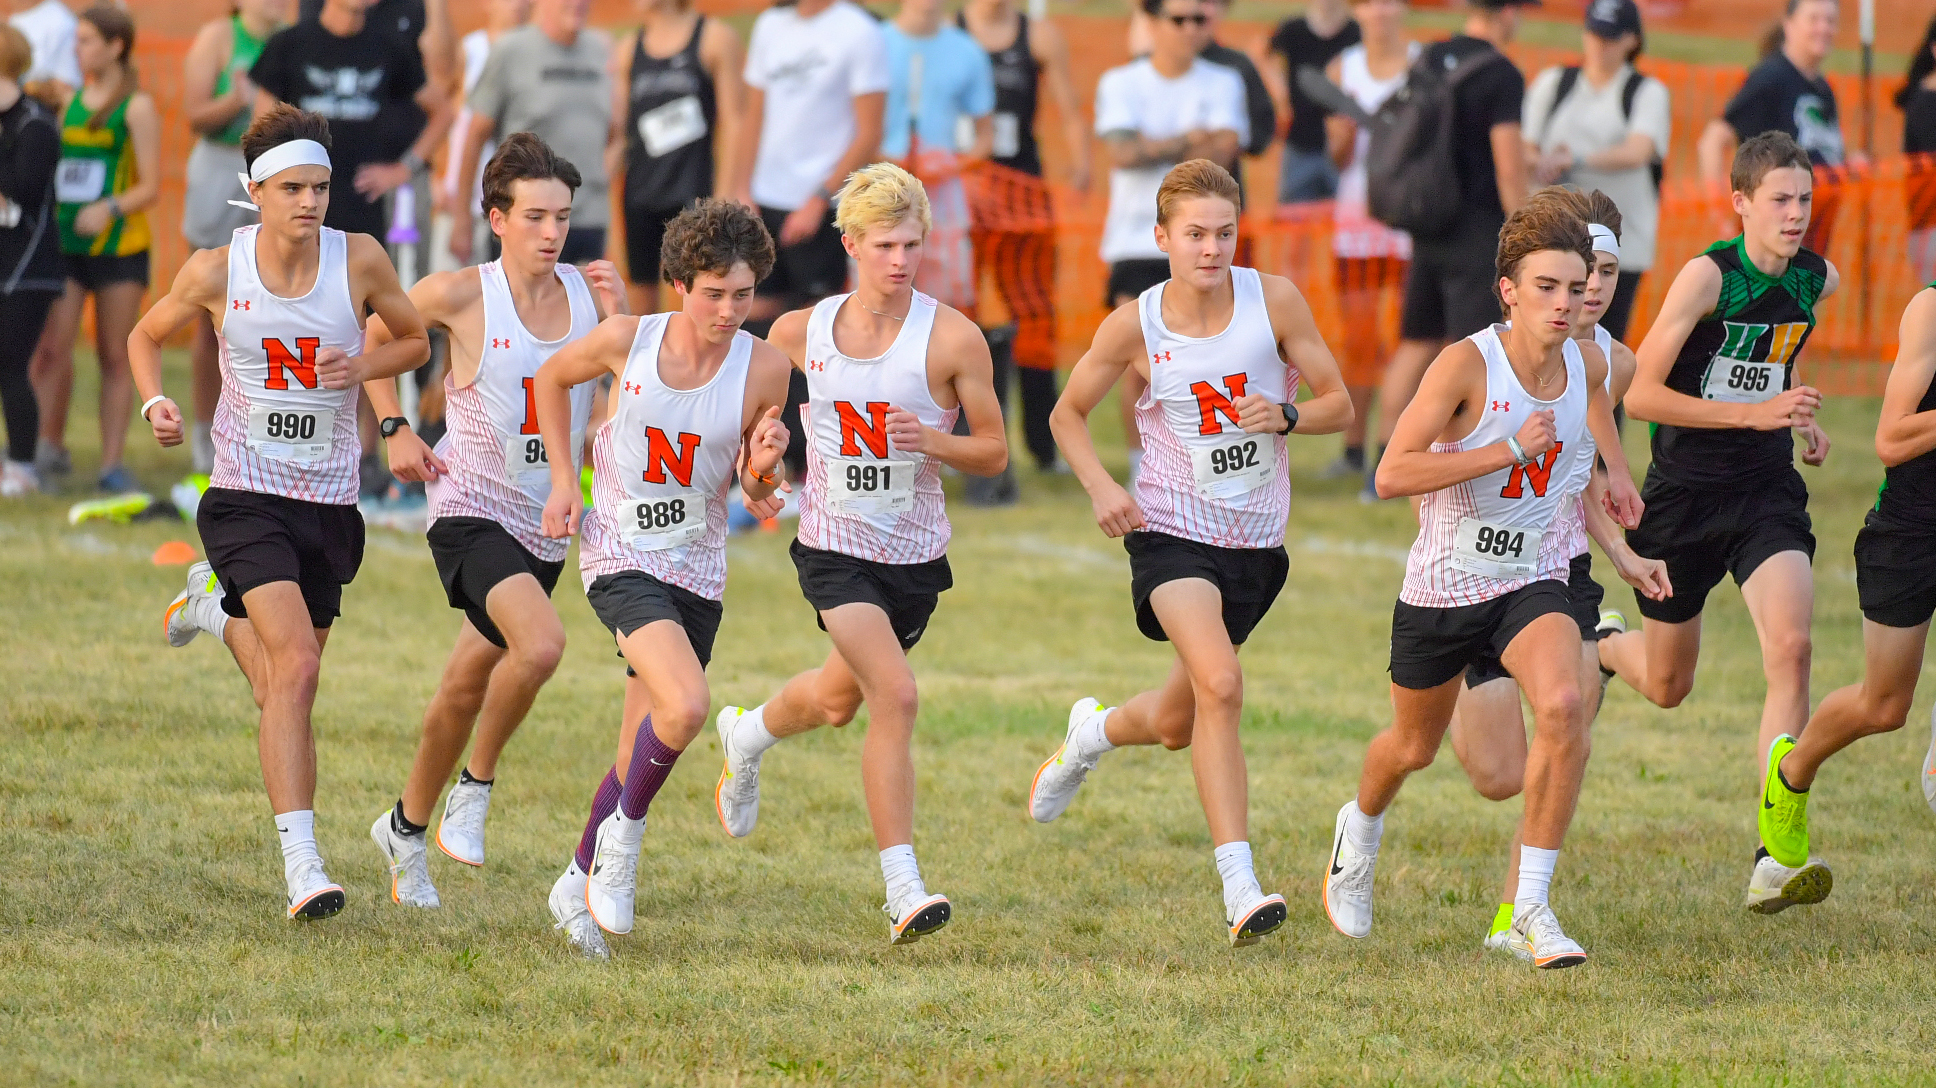 Communitys boys cross country team has a chance to qualify for State as a team. The top six teams from each Sectional advance to the State meet. 
Despite strong Sectional competition, with a good race, the Iron can earn a 5th or 6th place finish. 